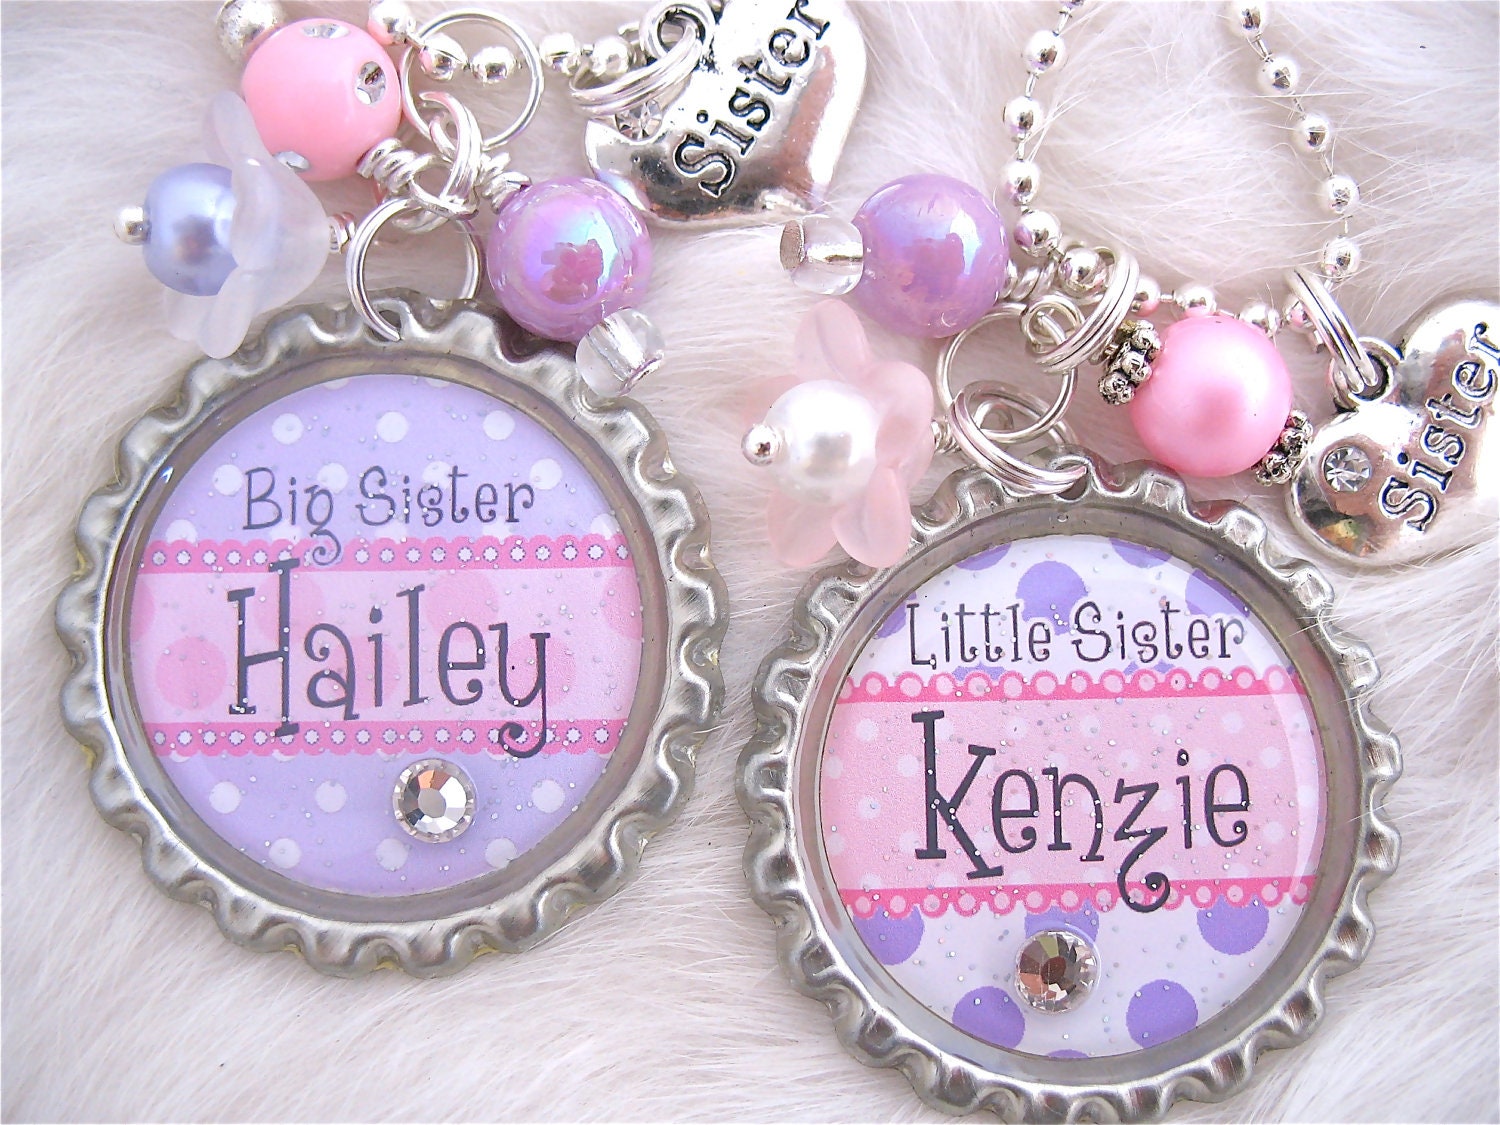 BIG SISTER Little Sister Jewelry Personalized Children Name